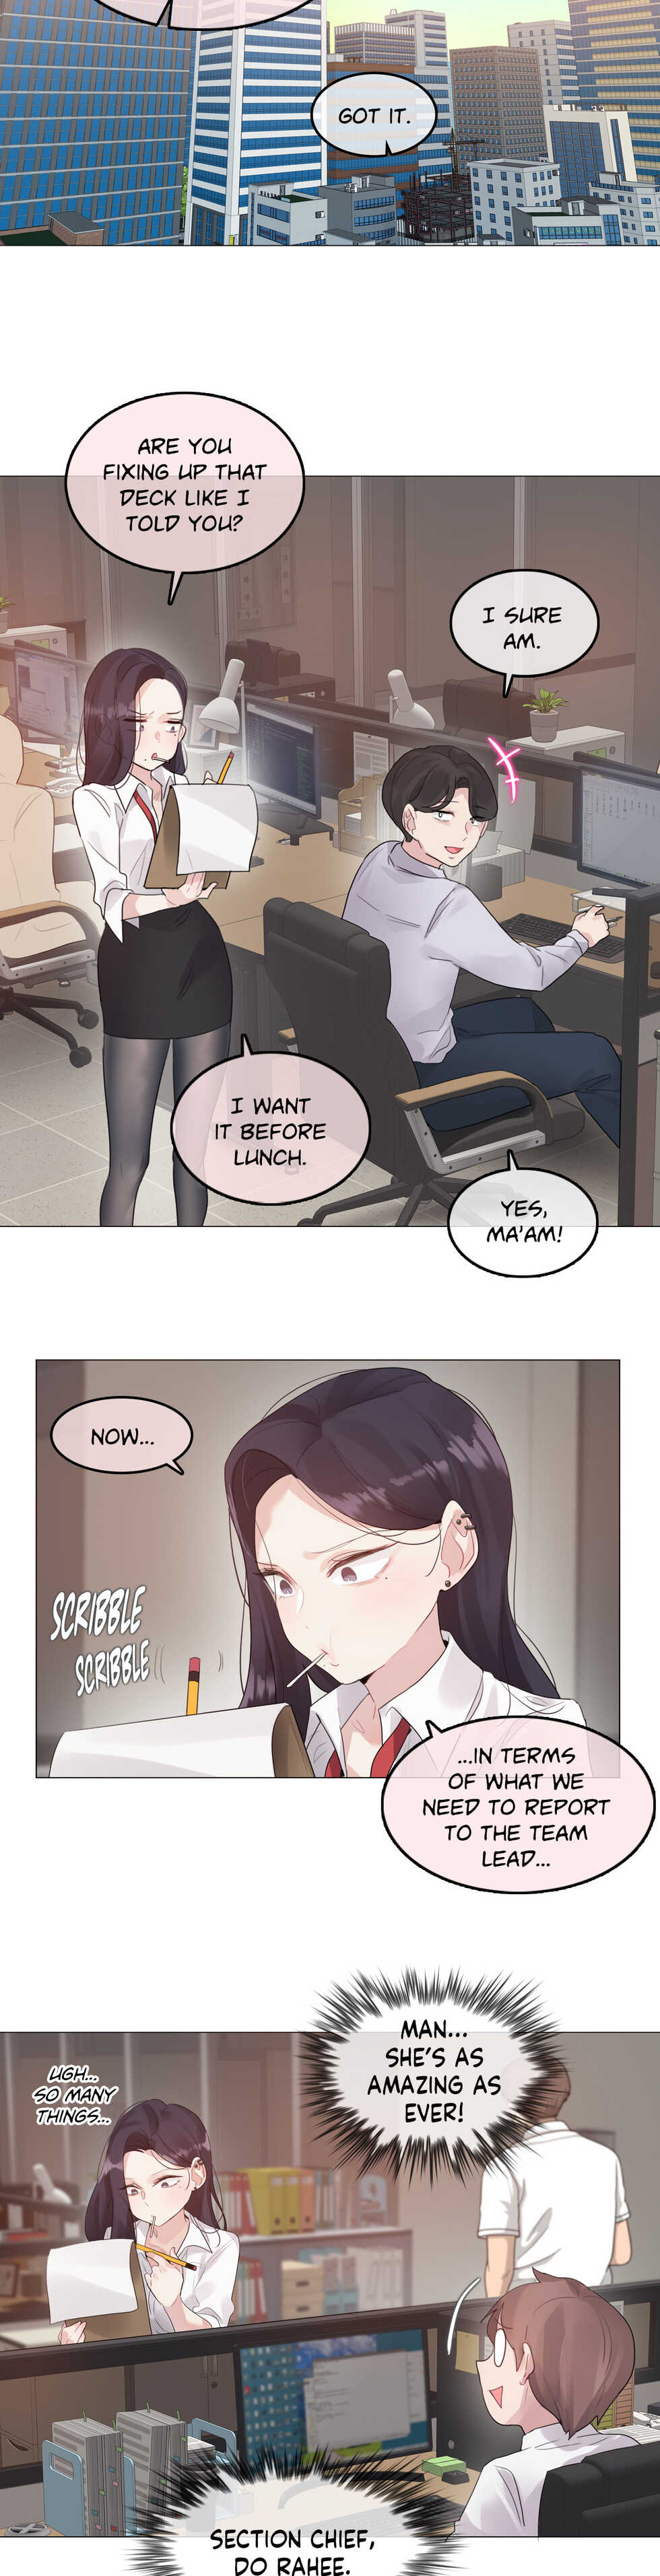 [Alice Crazy] Perverts' Daily Lives Episode 4: Sugar Sugar Chihuahua (Complete) - Page 26